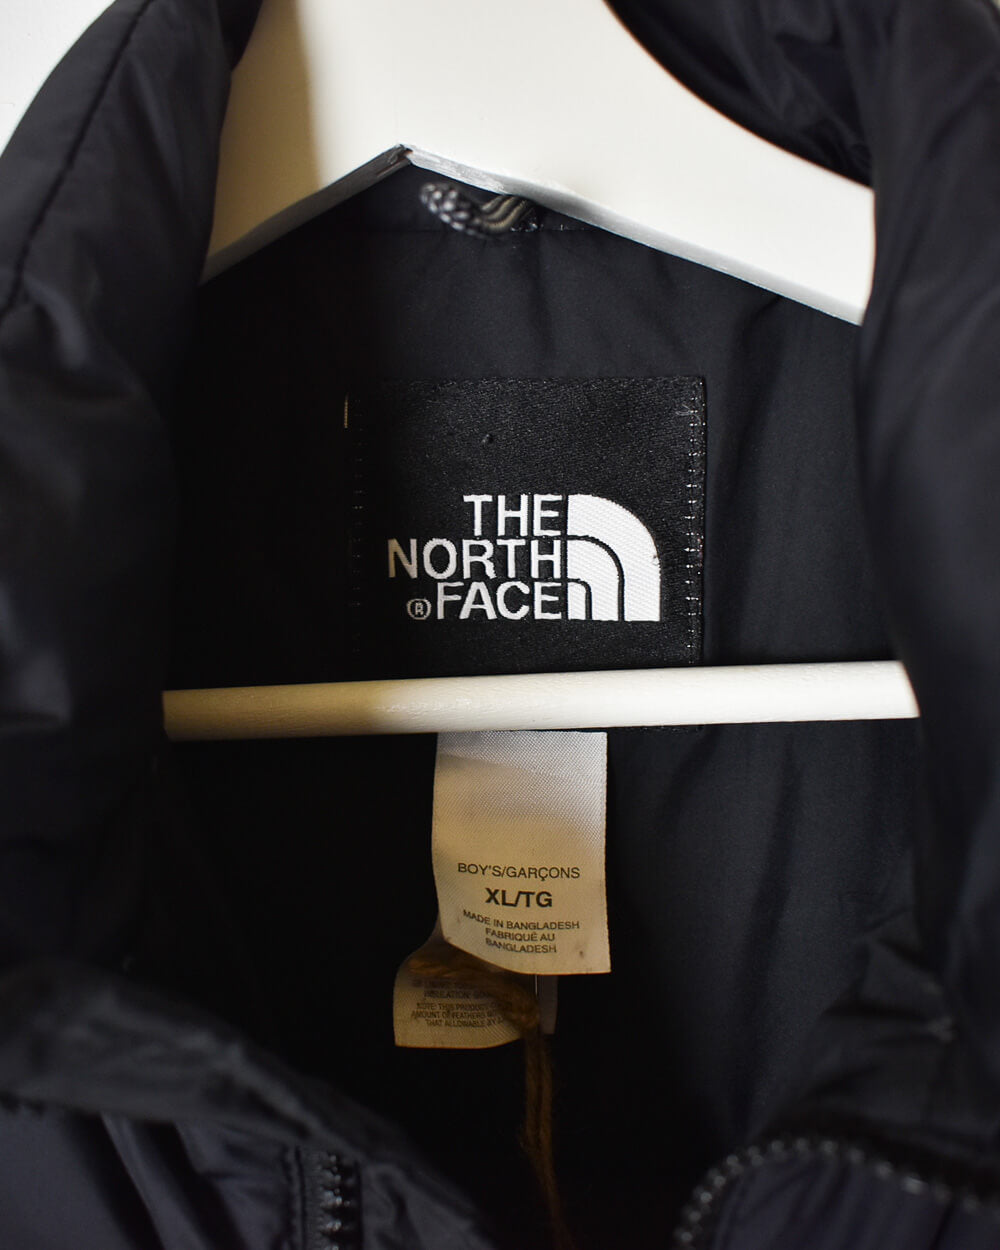 Black The North Face 600 Down Puffer Jacket - X-Small